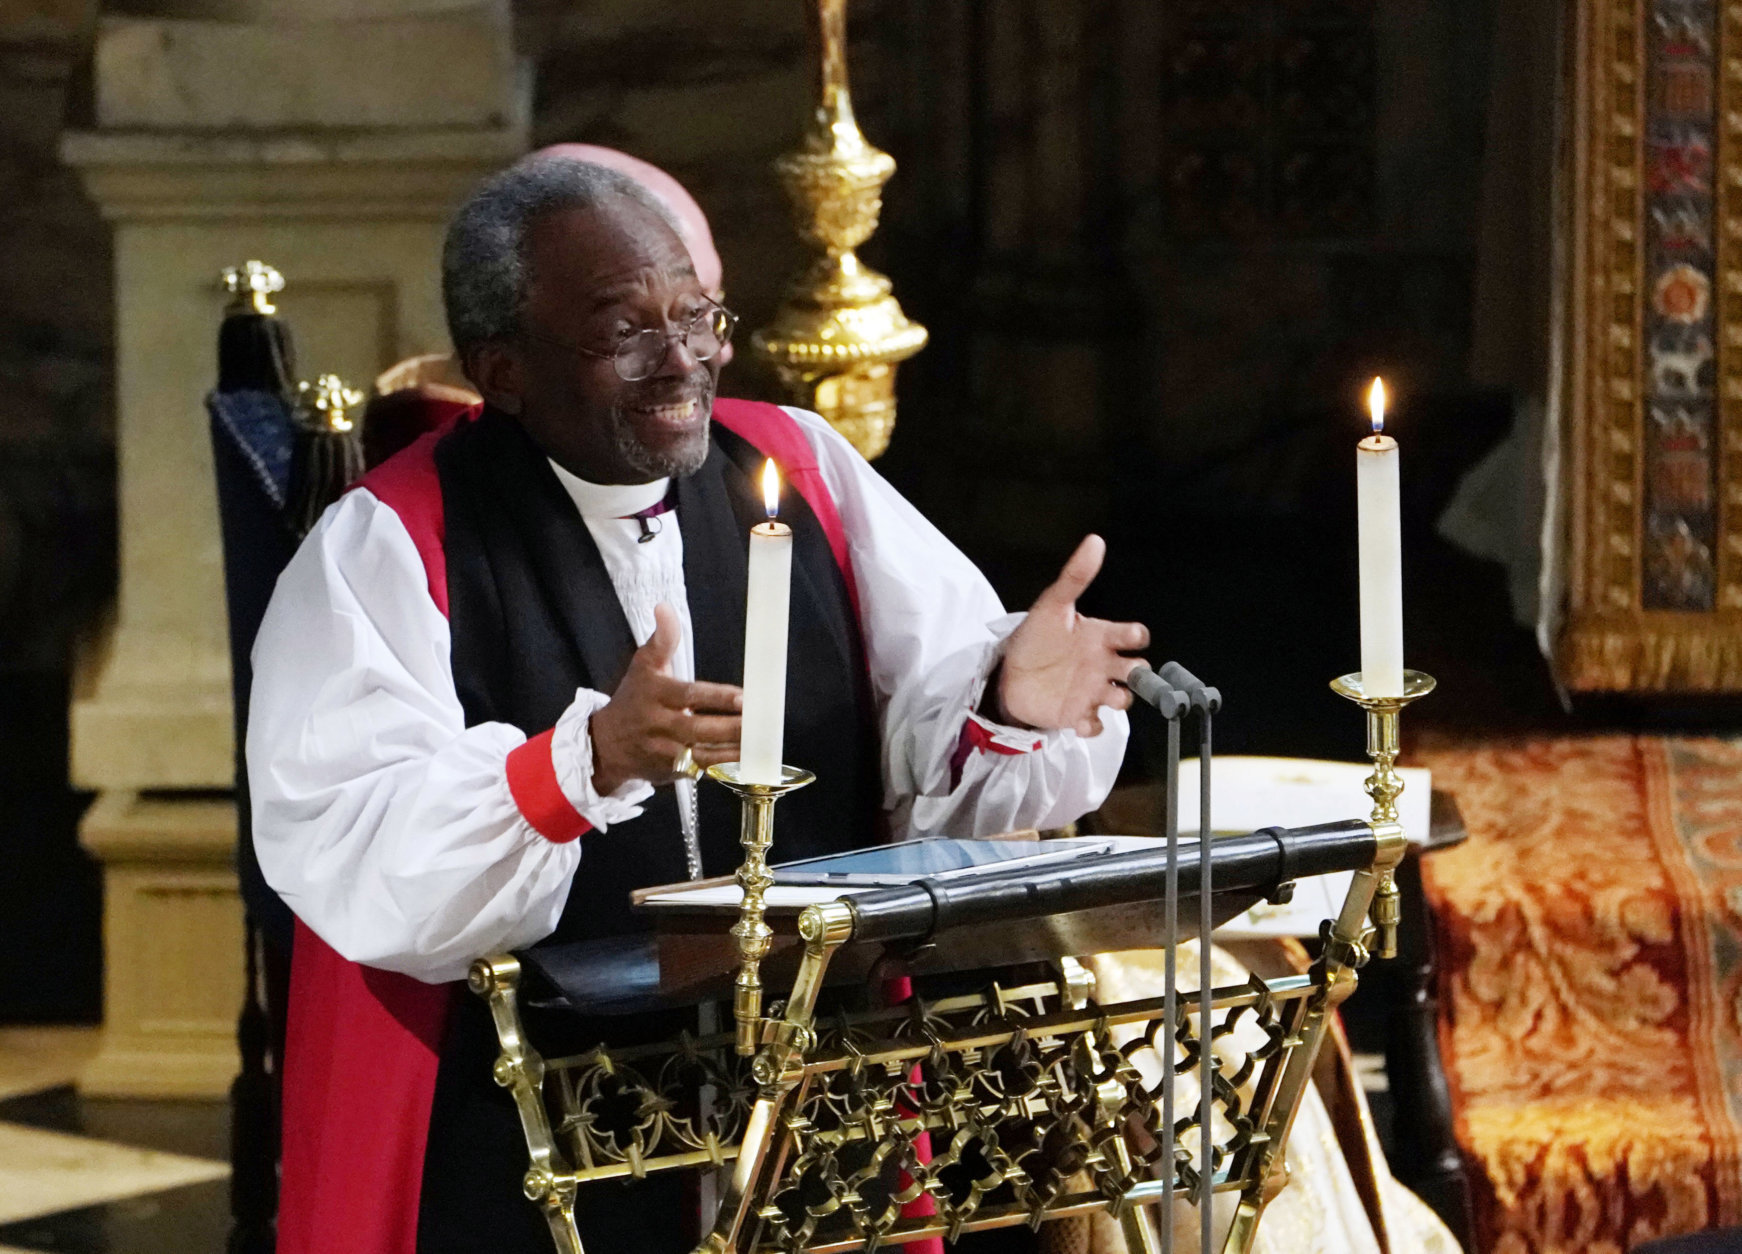 The Most Rev Bishop Michael Curry, primate of the Episcopal Church, speaks during the wedding ceremony of Prince Harry and Meghan Markle at St. George's Chapel in Windsor Castle in Windsor, near London, England, Saturday, May 19, 2018. (Owen Humphreys/pool photo via AP)